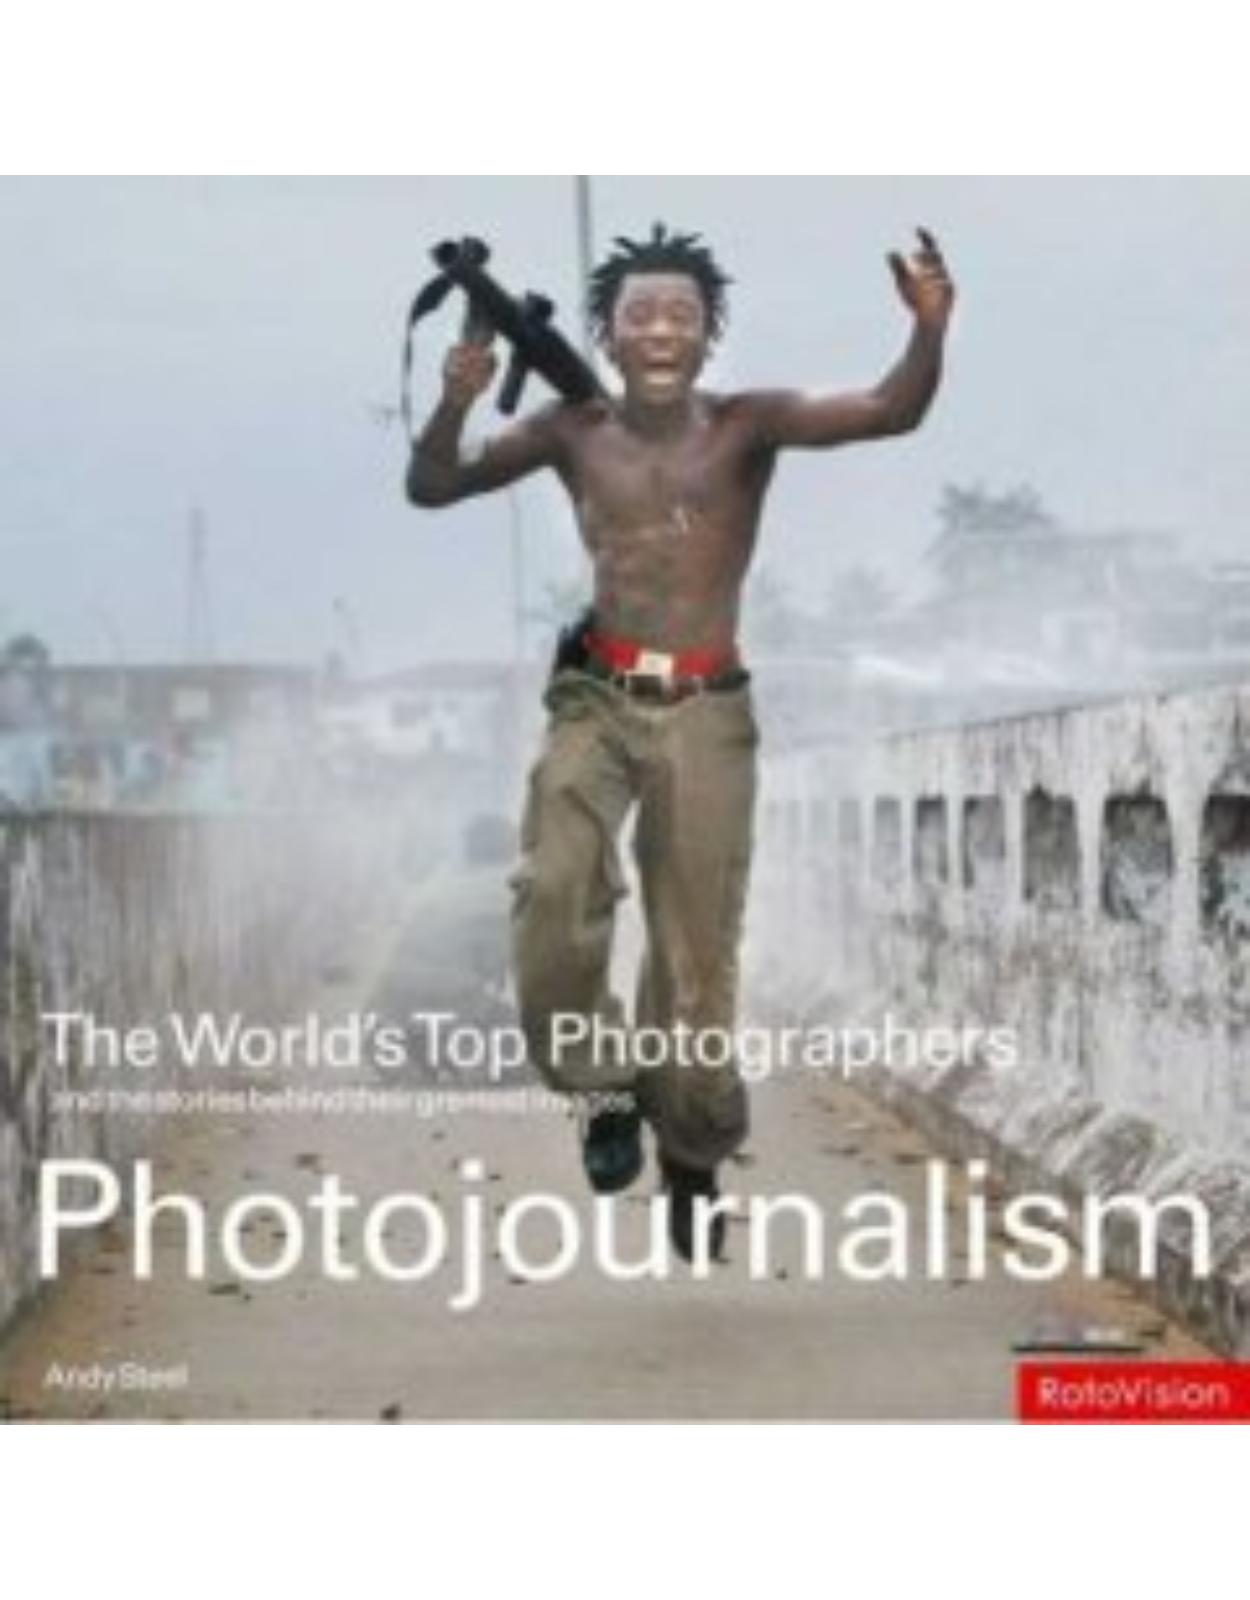 The World's Top Photographers: Photojournalism